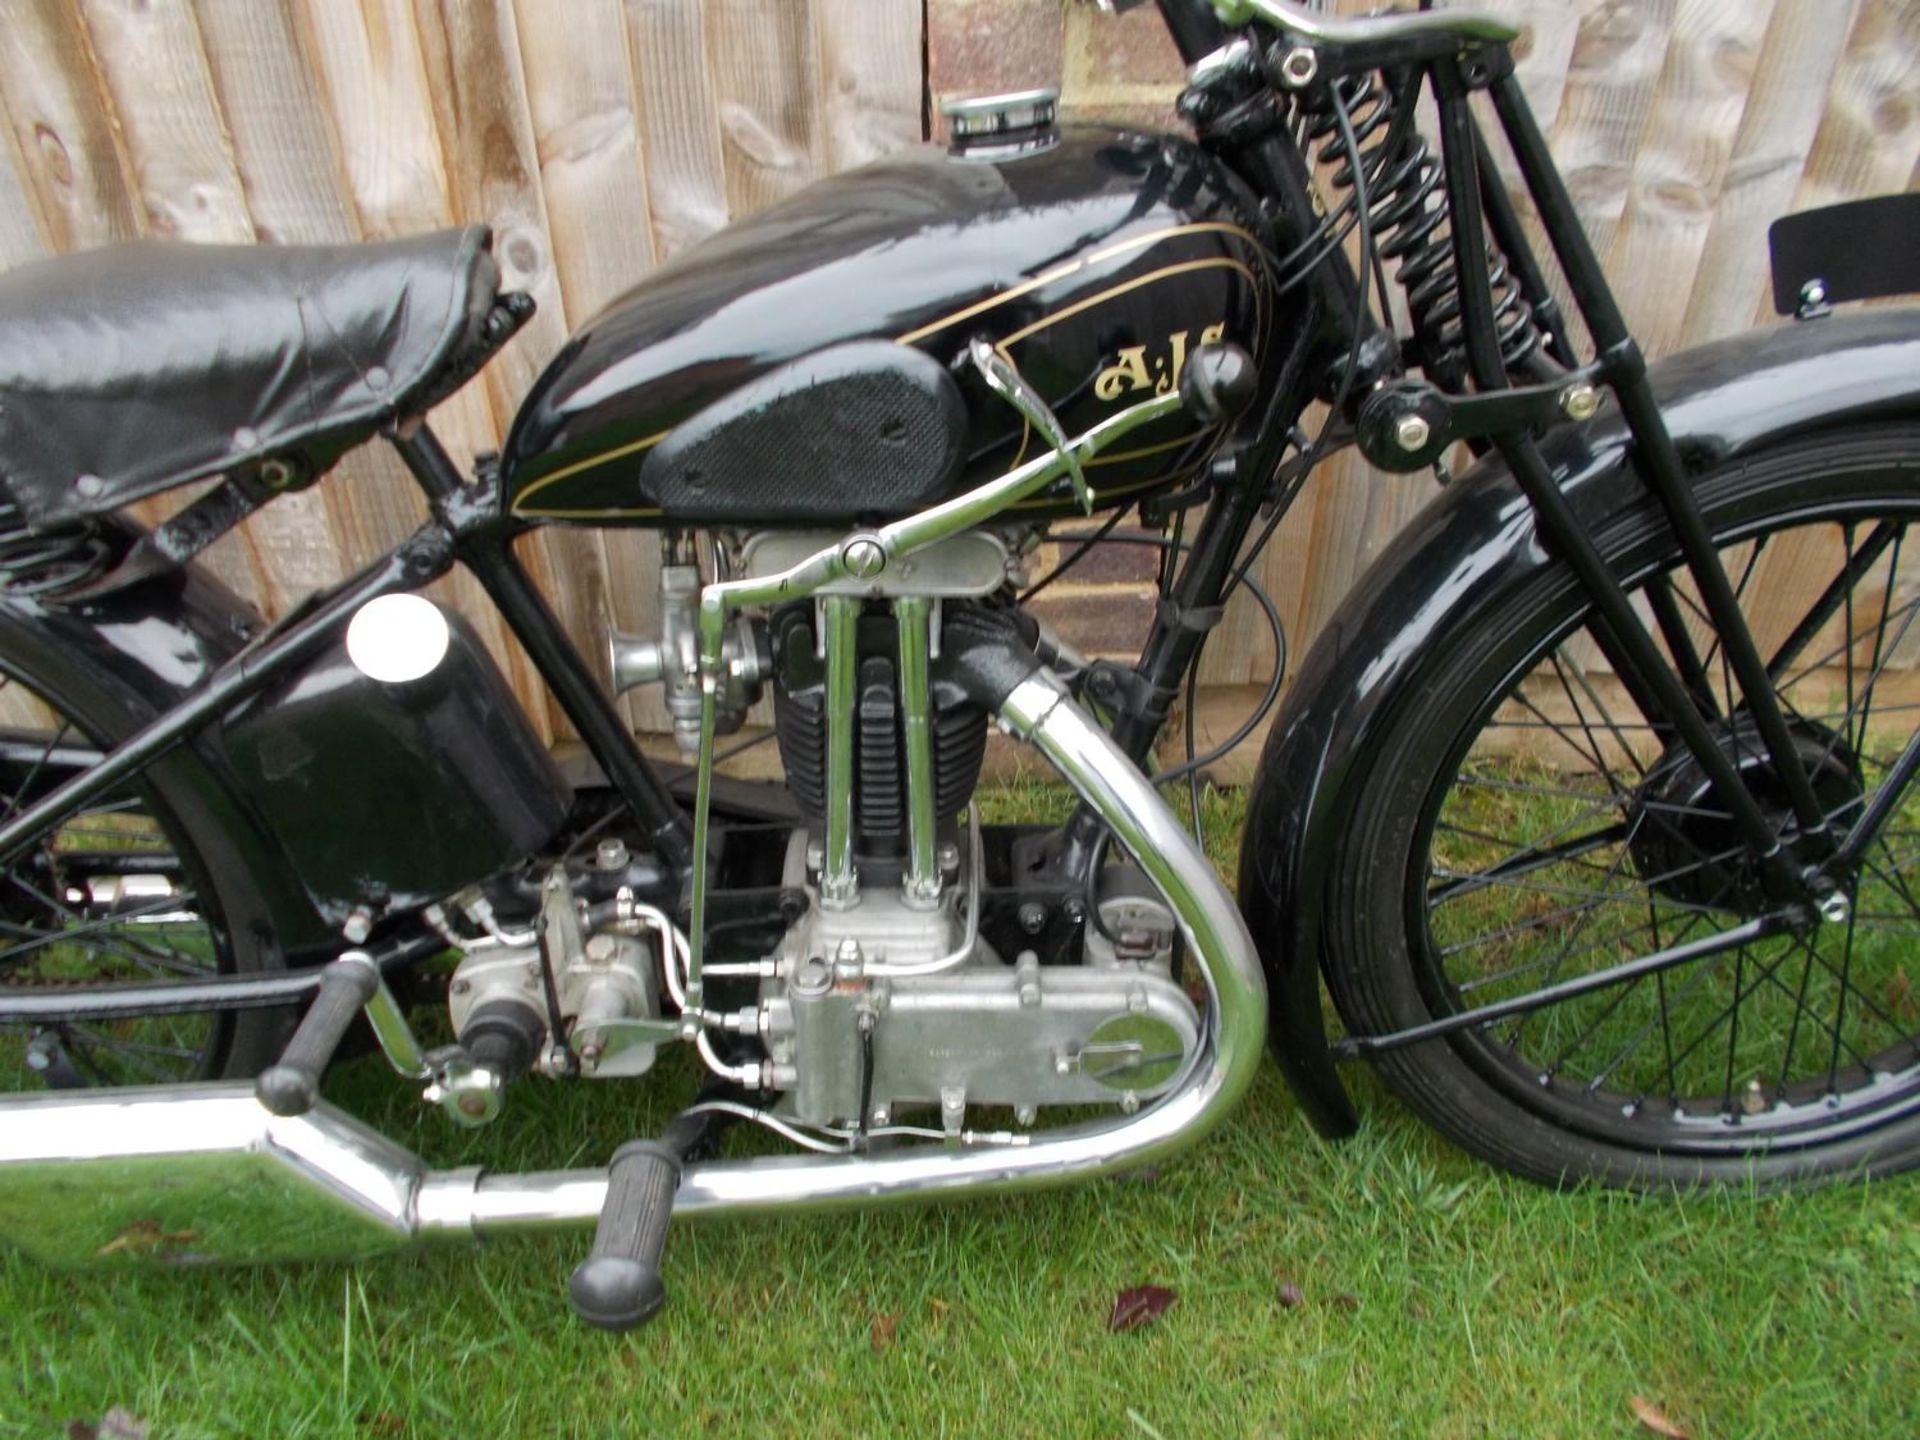 A 1930 AJS R12 250 Frame number R12?13750 Engine number R12?137507 Crankcase numbers 2665 Restored - Image 4 of 7